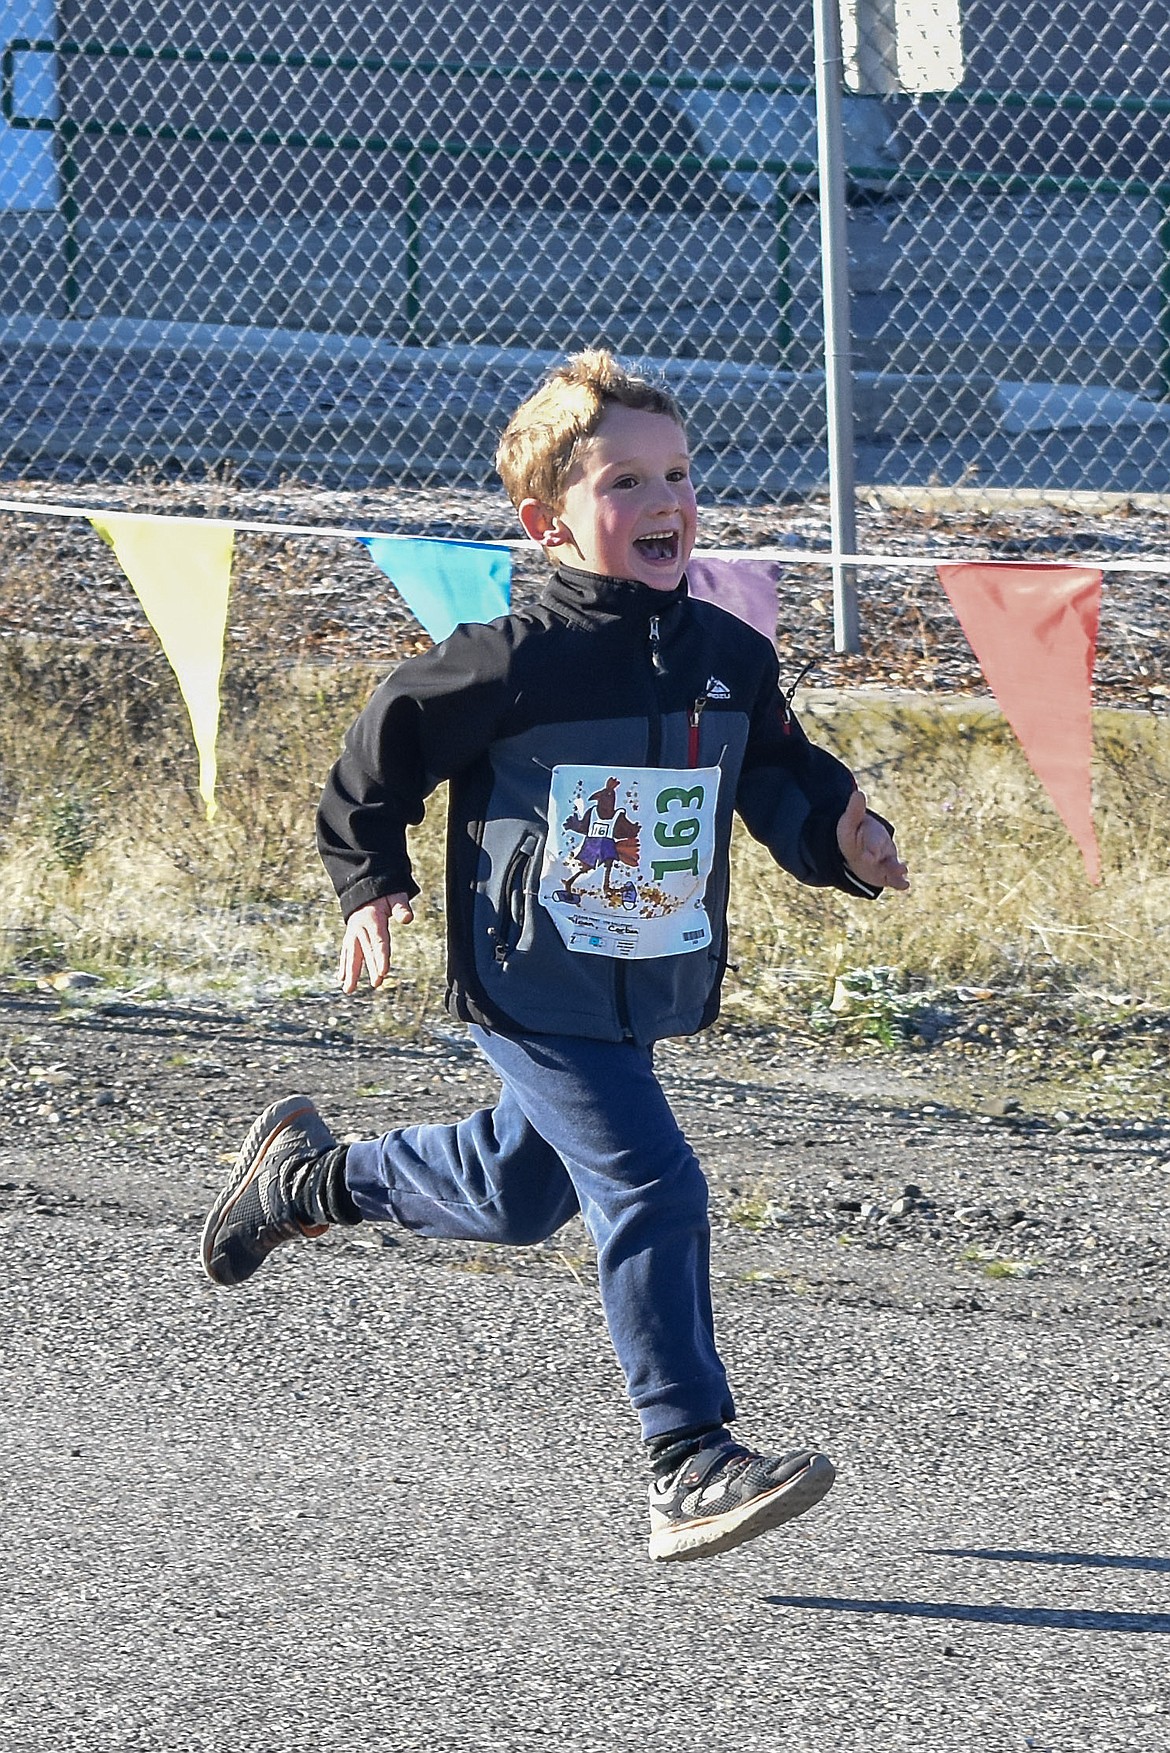 Corban Sloan sprinted out the final stretch with a smile on his face during the Turkey Dash 5k fun run/walk Saturday, Nov 17. (Ben Kibbey/The Western News)